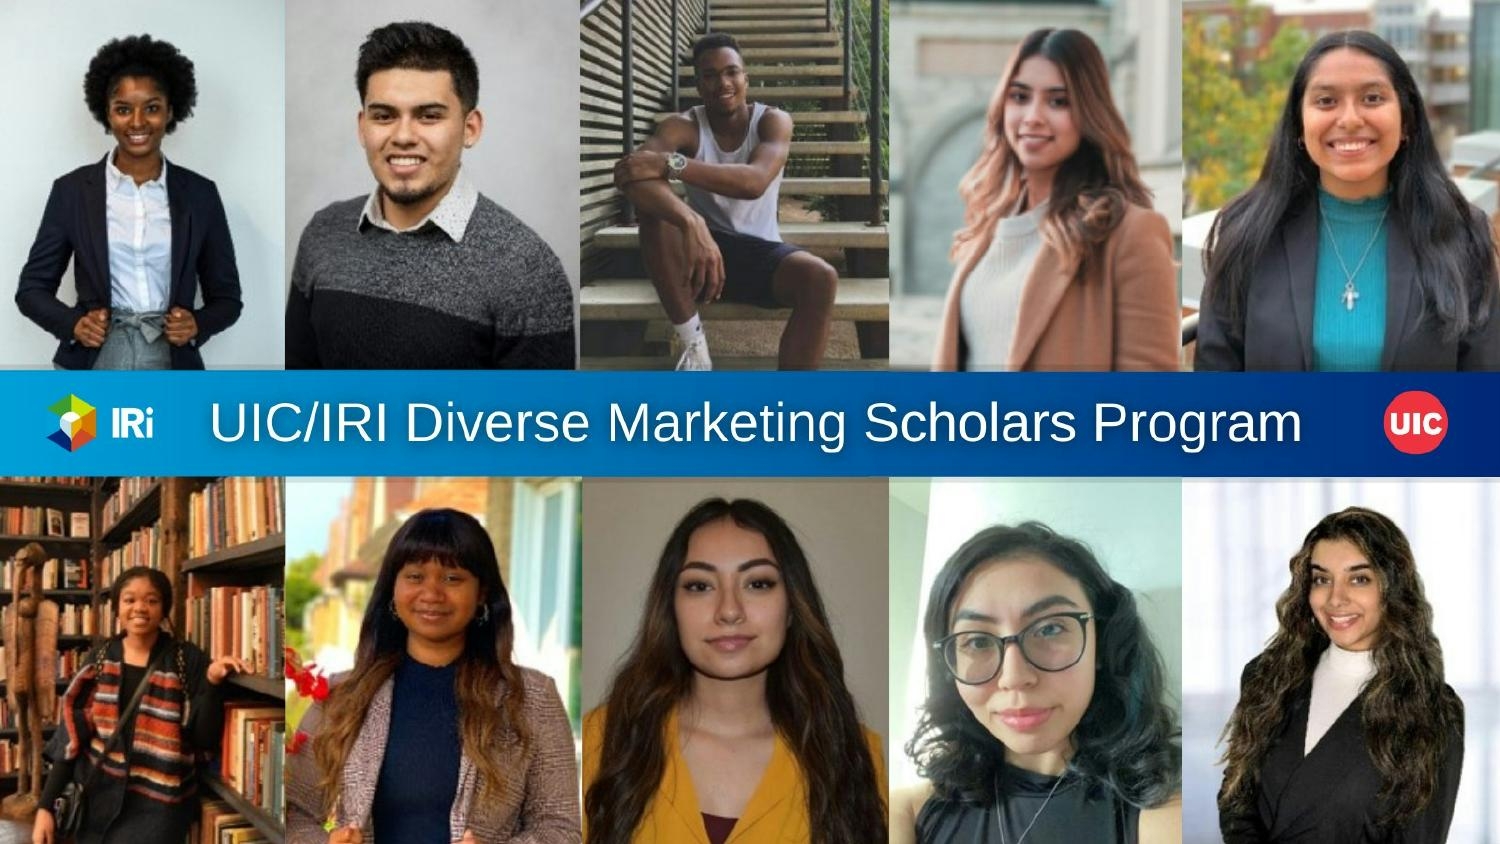 IRI launched UIC/IRI Diverse Marketing Scholars Program to for 10 UIC students who are also students of color. 